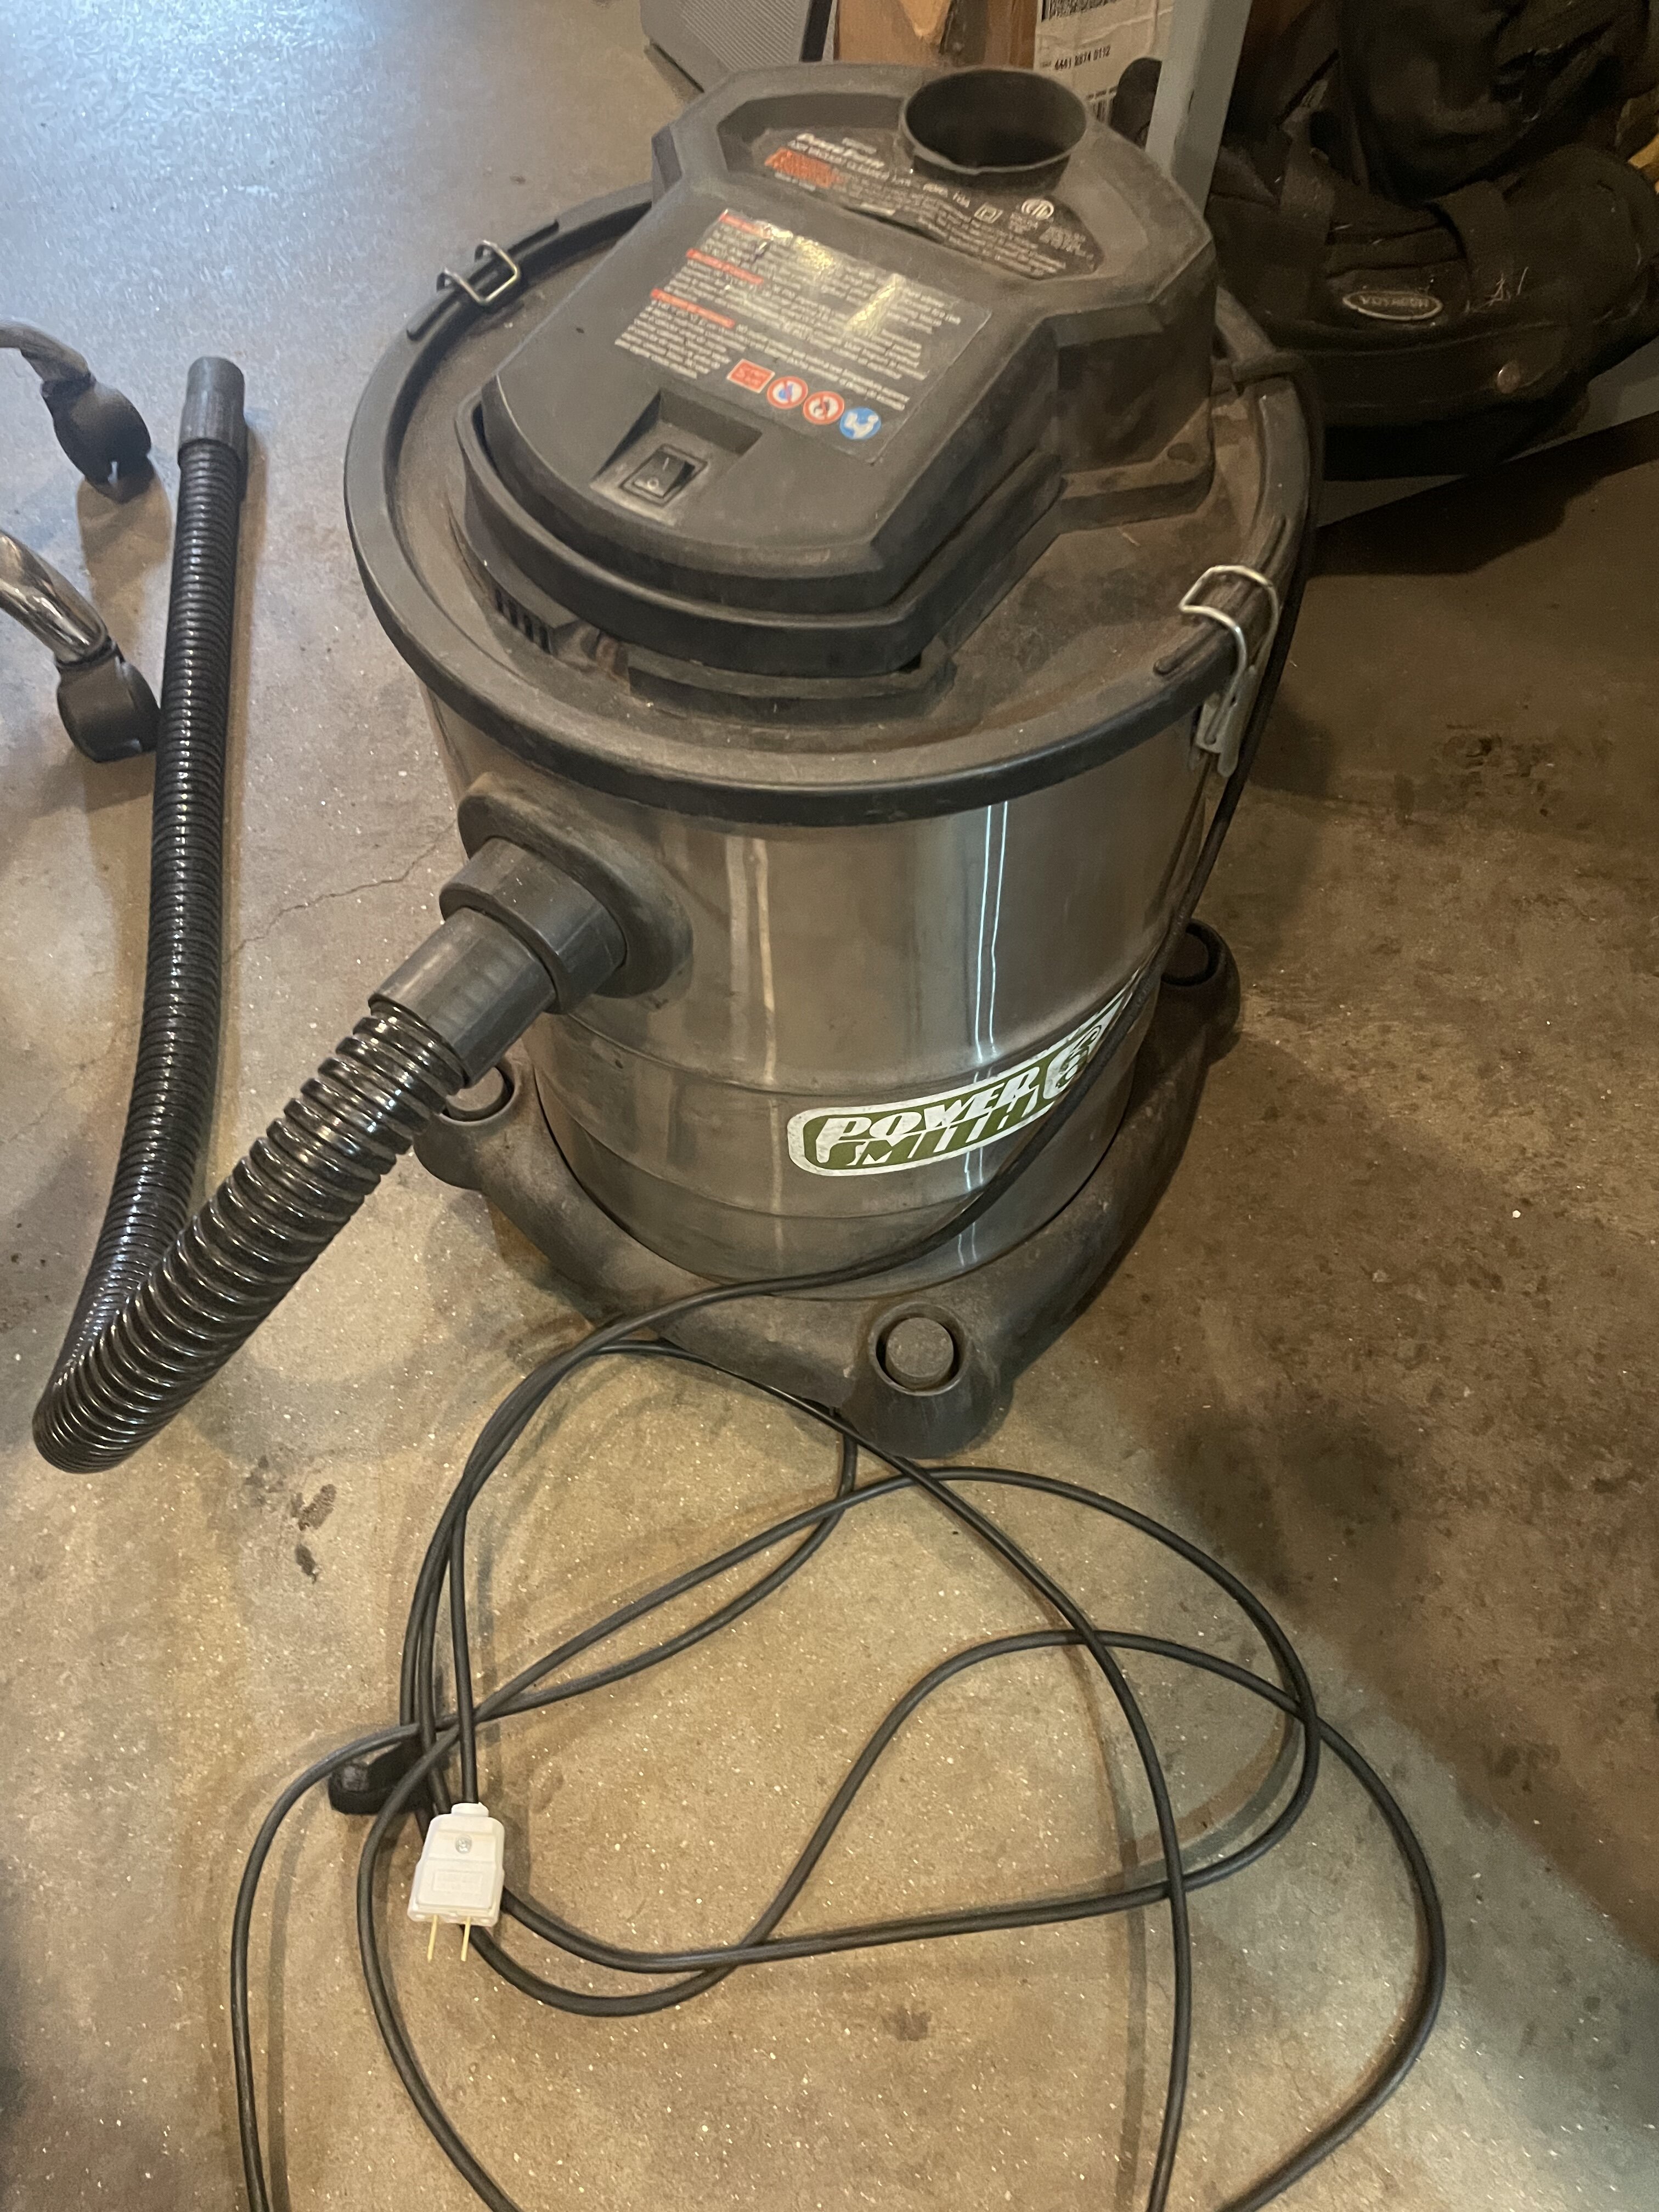 New Top Head with motor & new electric plug for Power Smith ash vac works like new!